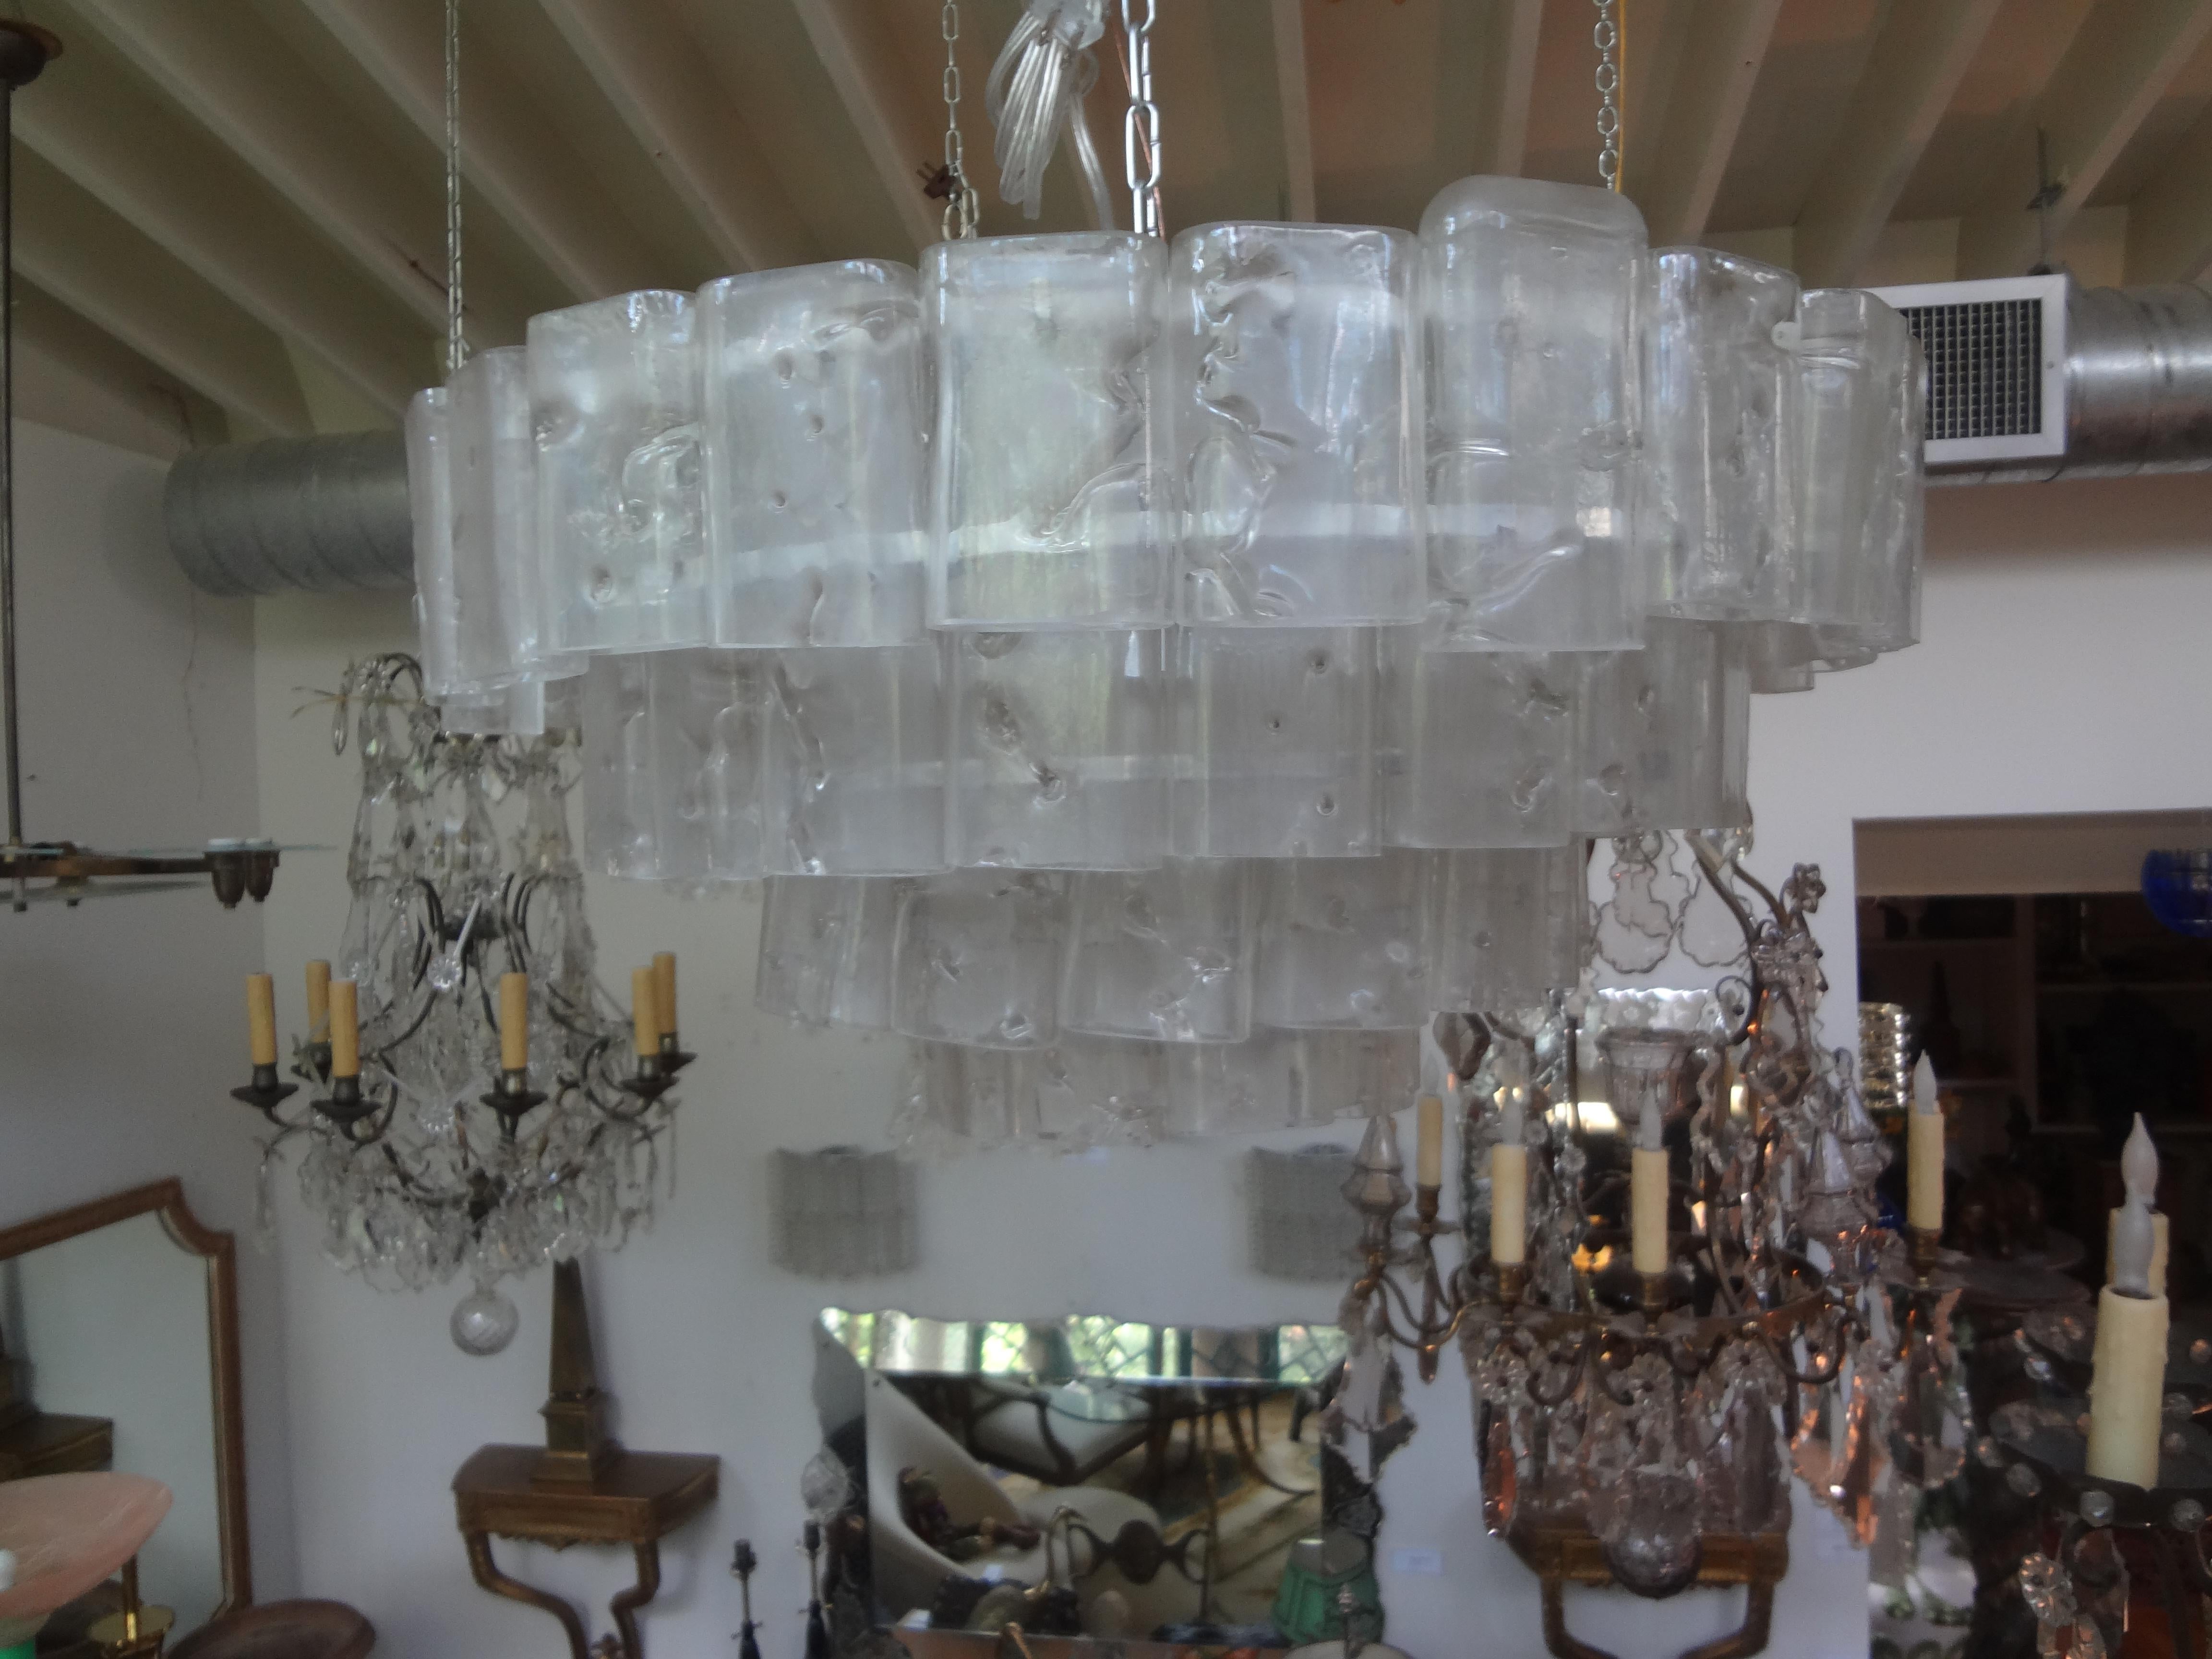 Vintage Murano glass chandelier by Carlo Nason For Mazzega.
This stunning Mid-Century Modern four tier Murano chandelier is perfect for older homes with lower ceiling heights or can be suspended from the appropriate amount of chain for higher